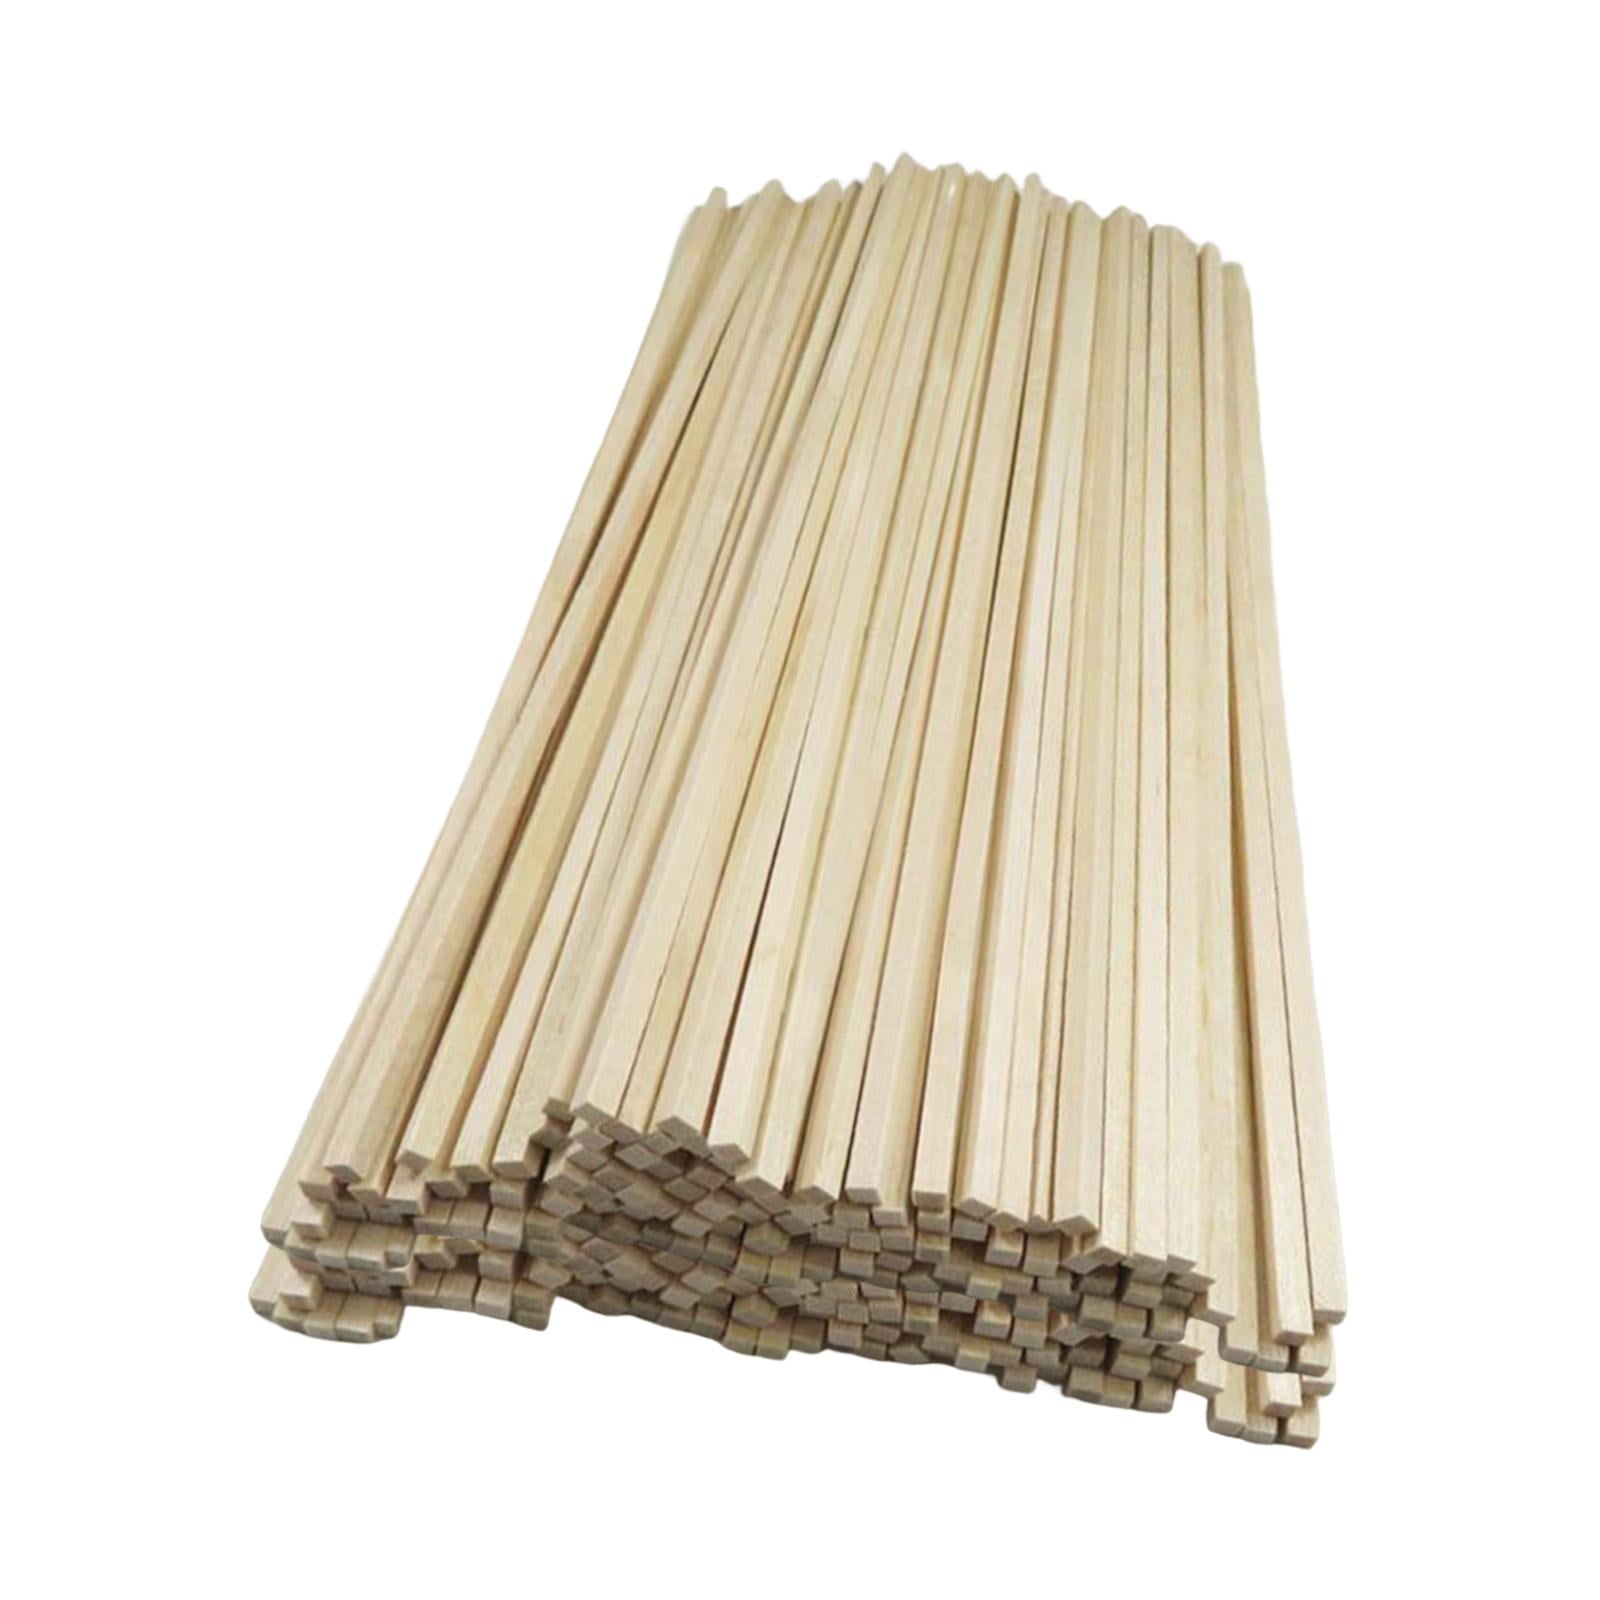 100x Unfinished Wood Sticks, Small Woodcrafts Hardwood Strips, for Crafts  Home Decoration Model Toys Building Carving Supplies Accessories 250cm 